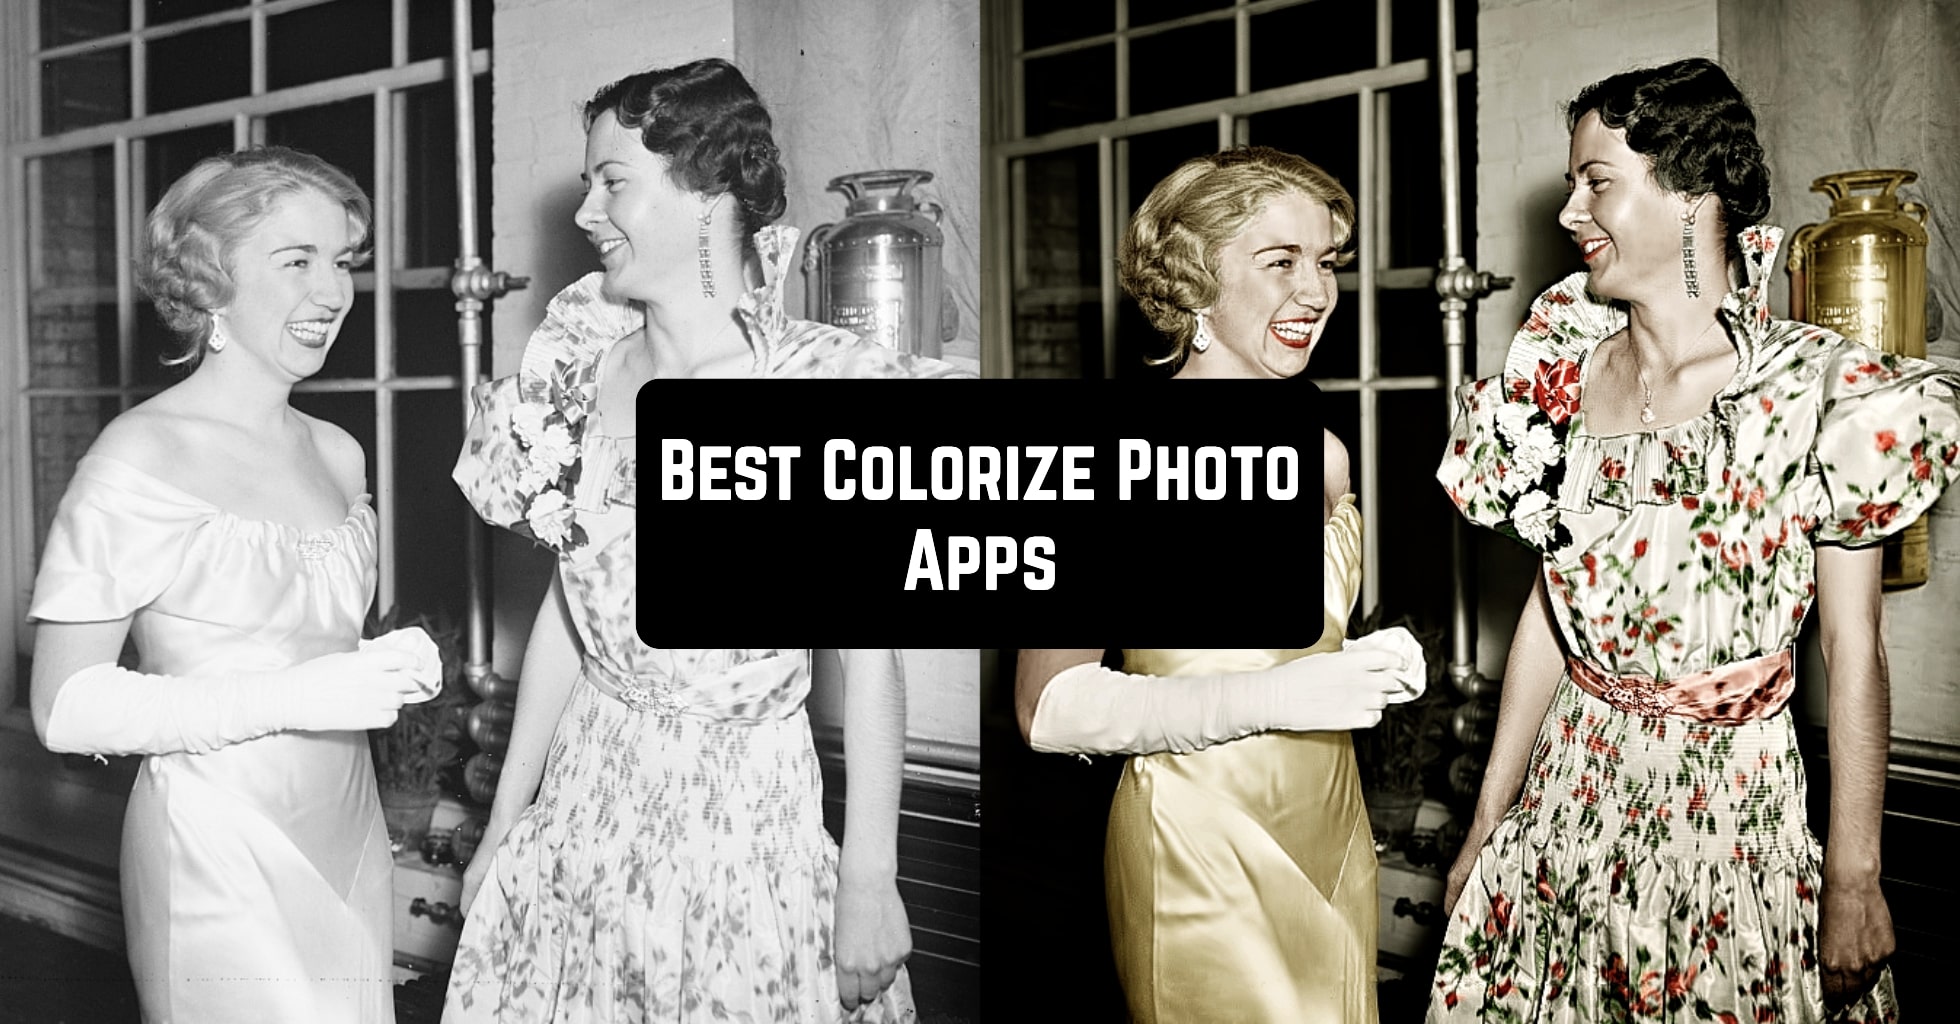 11 Best Colorize Photo Apps for Android & iOS